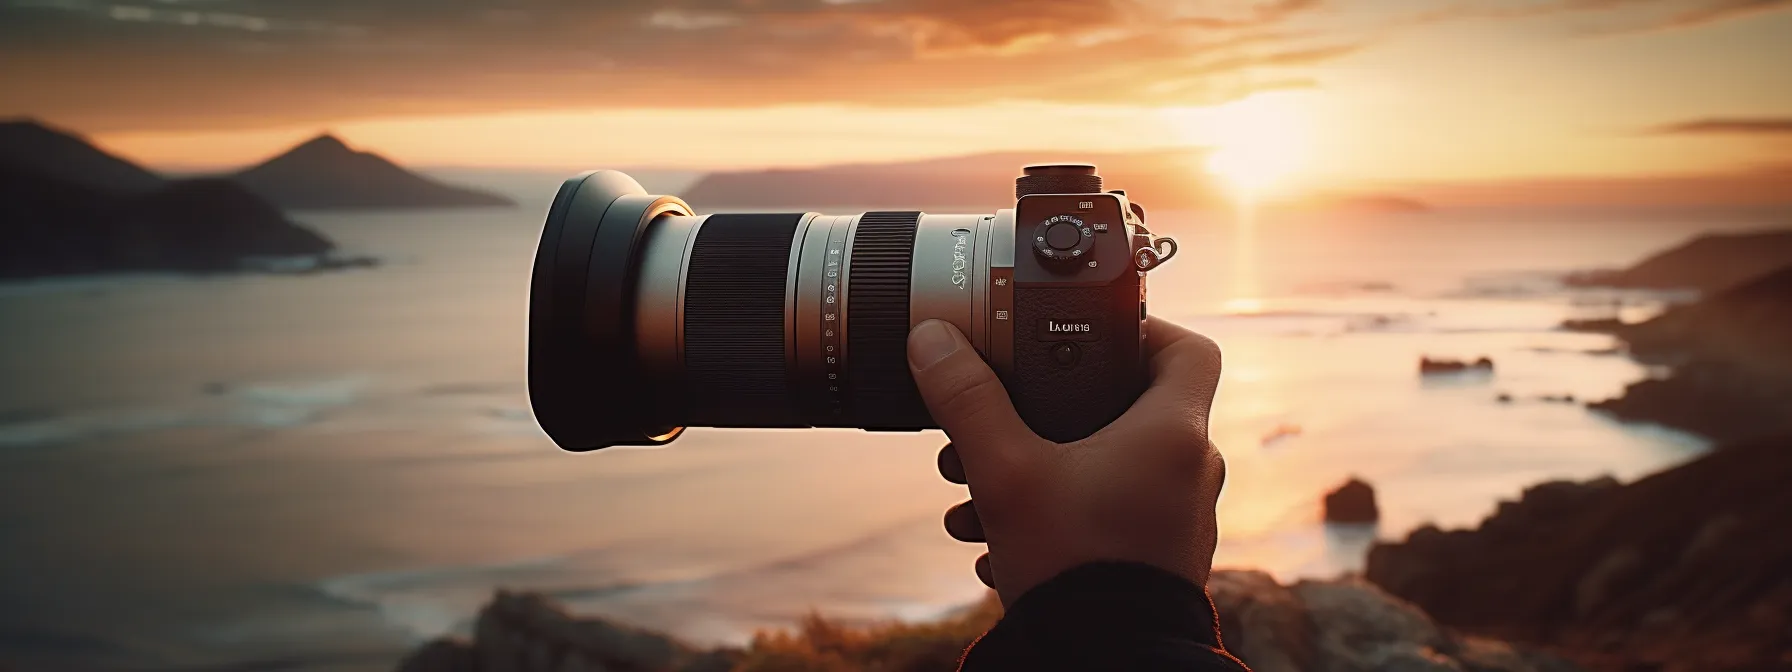 a person holding a camera and capturing a stunning landscape shot.